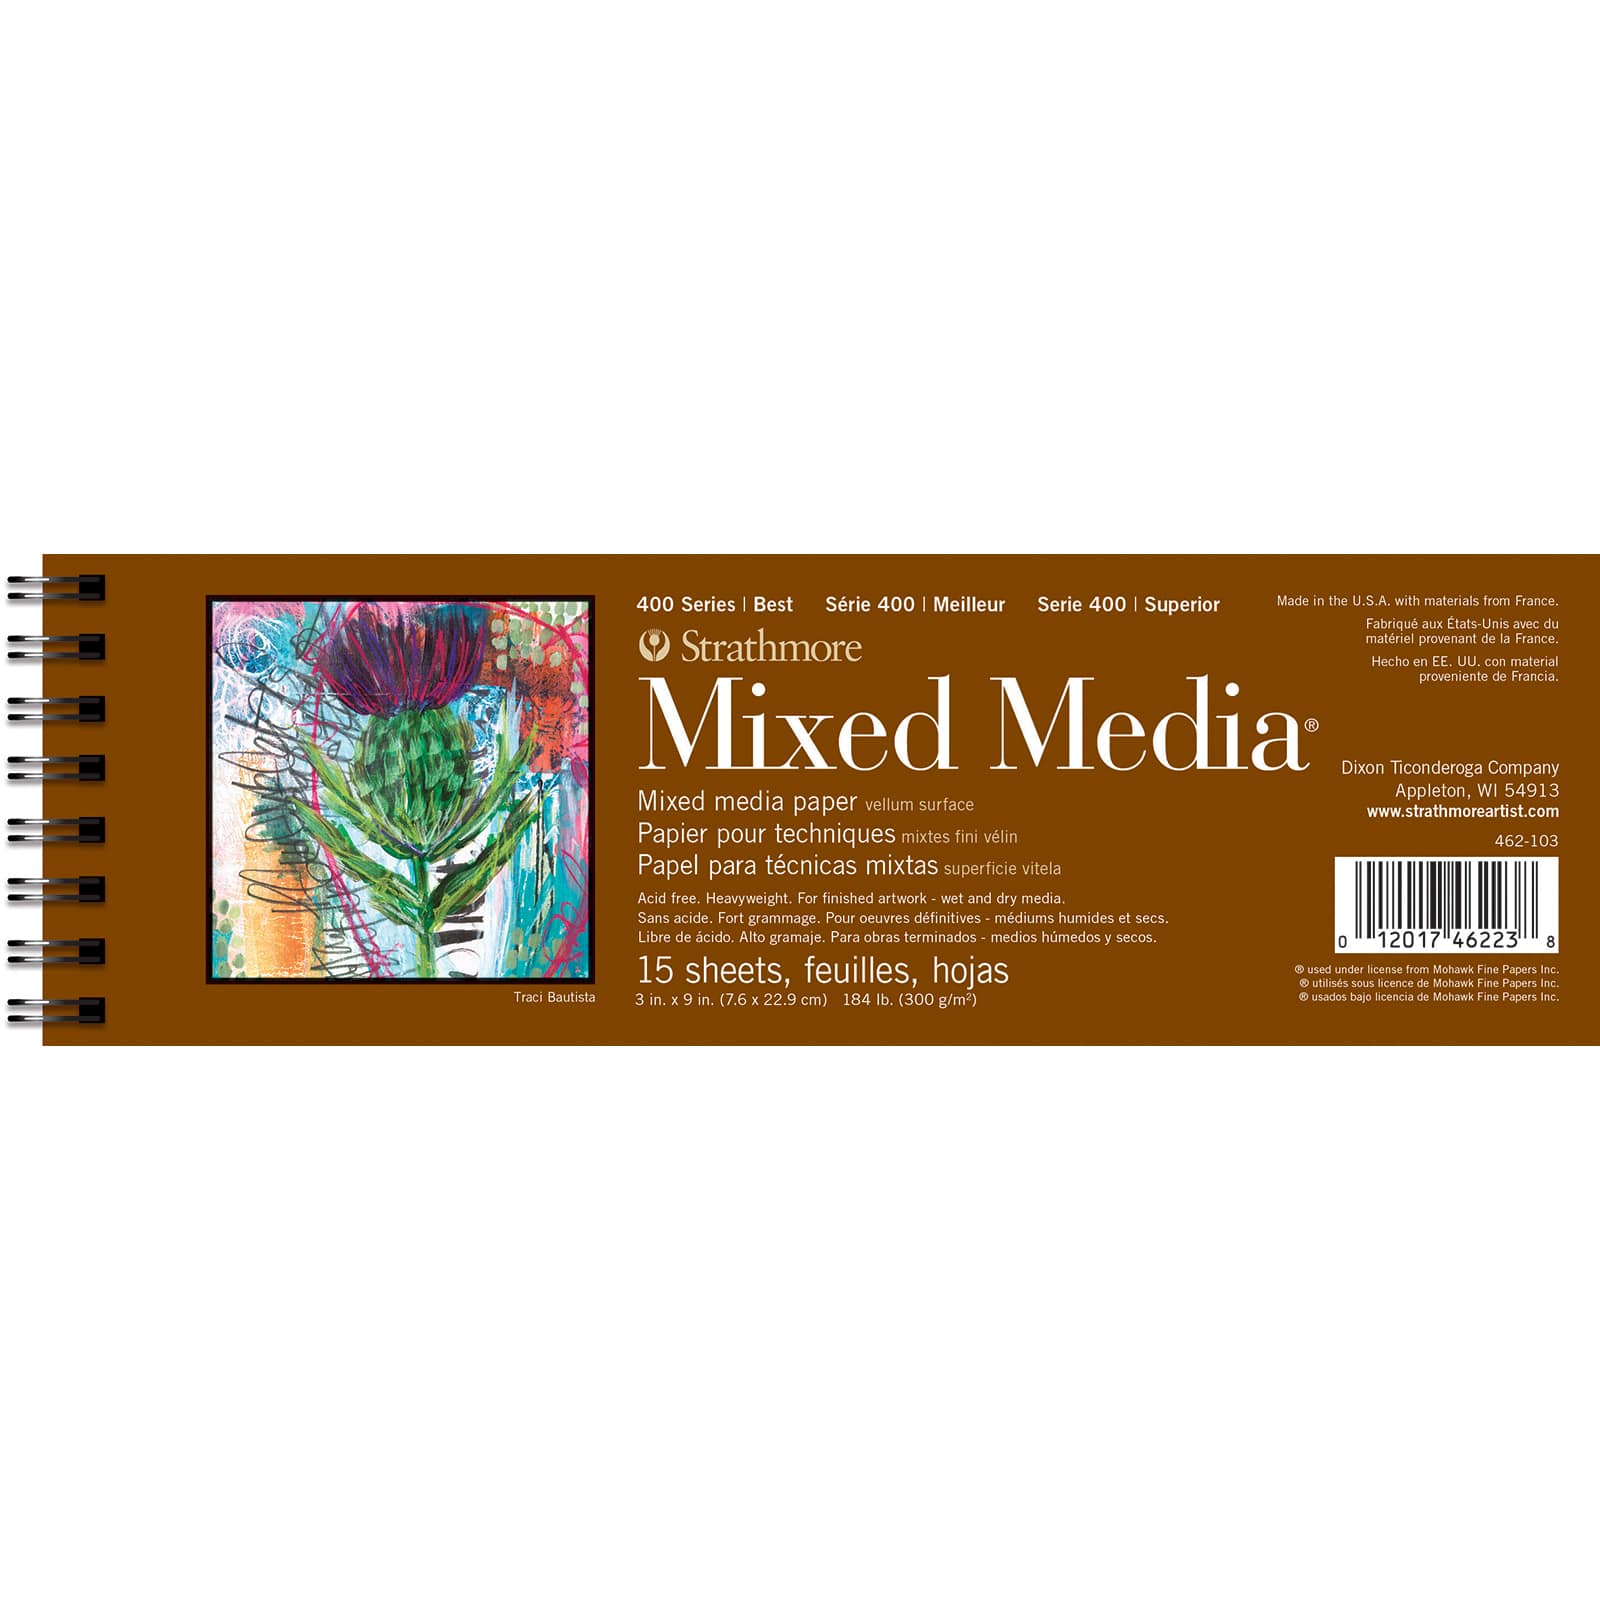 PASTEL PAPER PAD 400 18X24 24 SHEETS ASSORTED COLORS: Savannah College Of  Art And Design